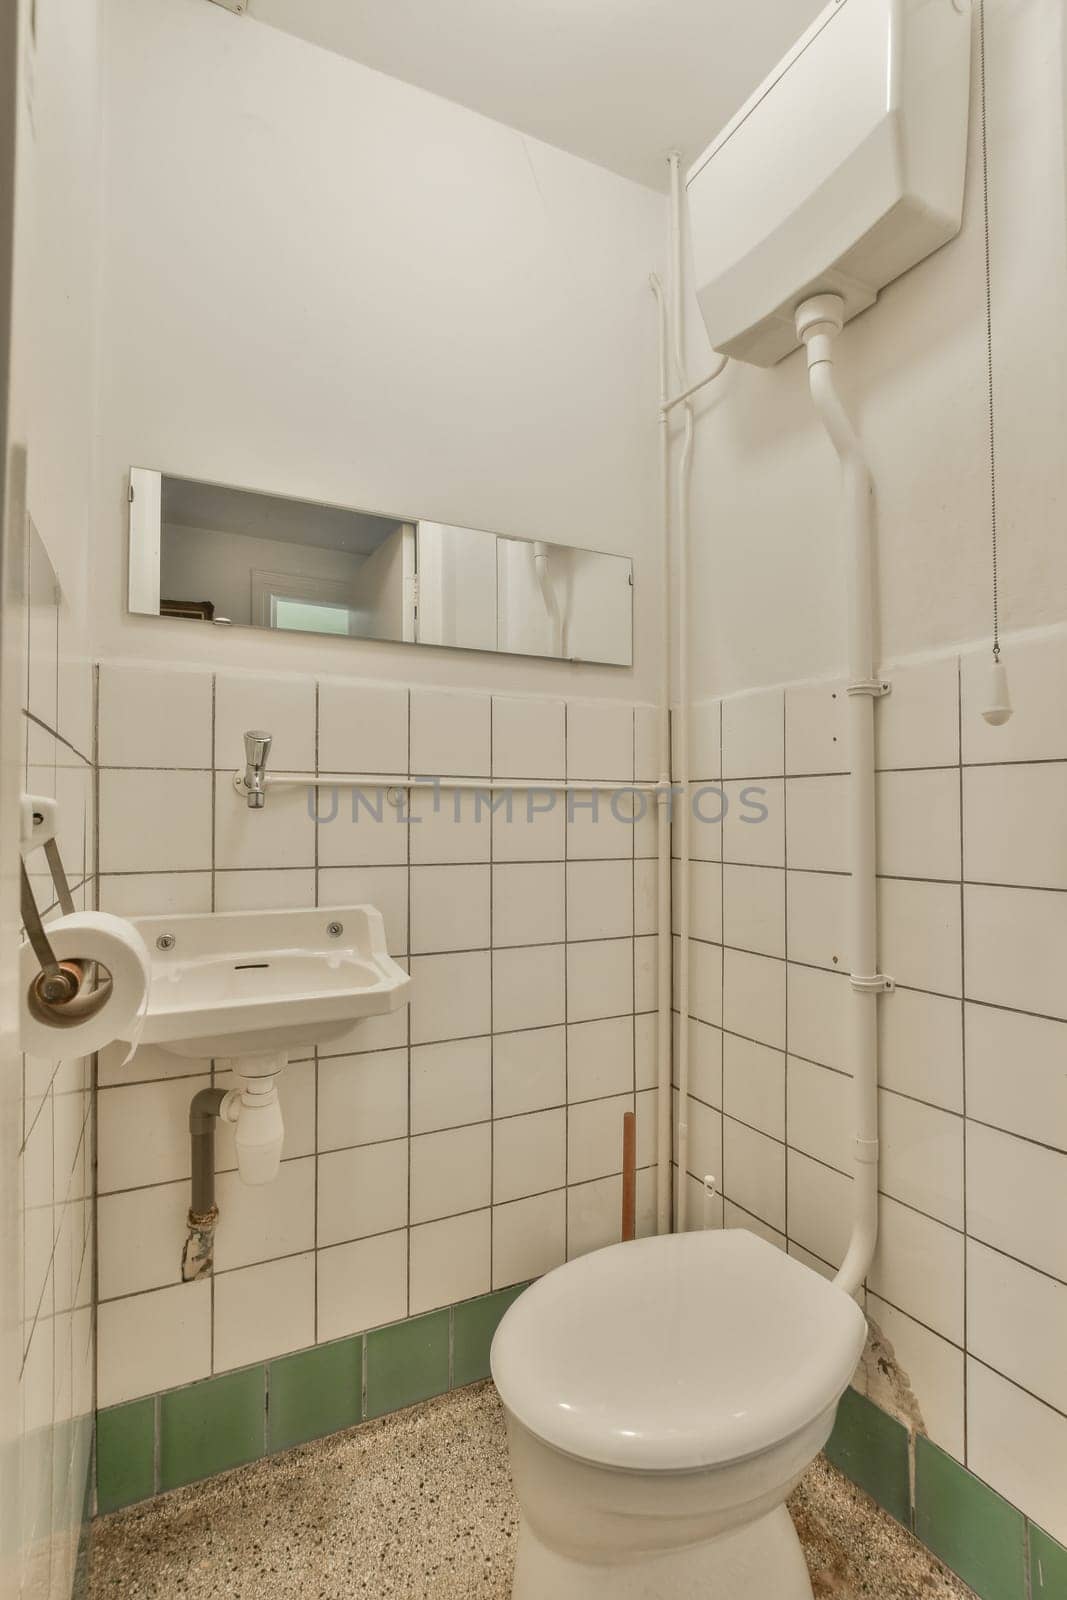 a bathroom with white tiles and green trim on the walls, along with a toilet in the center of the room